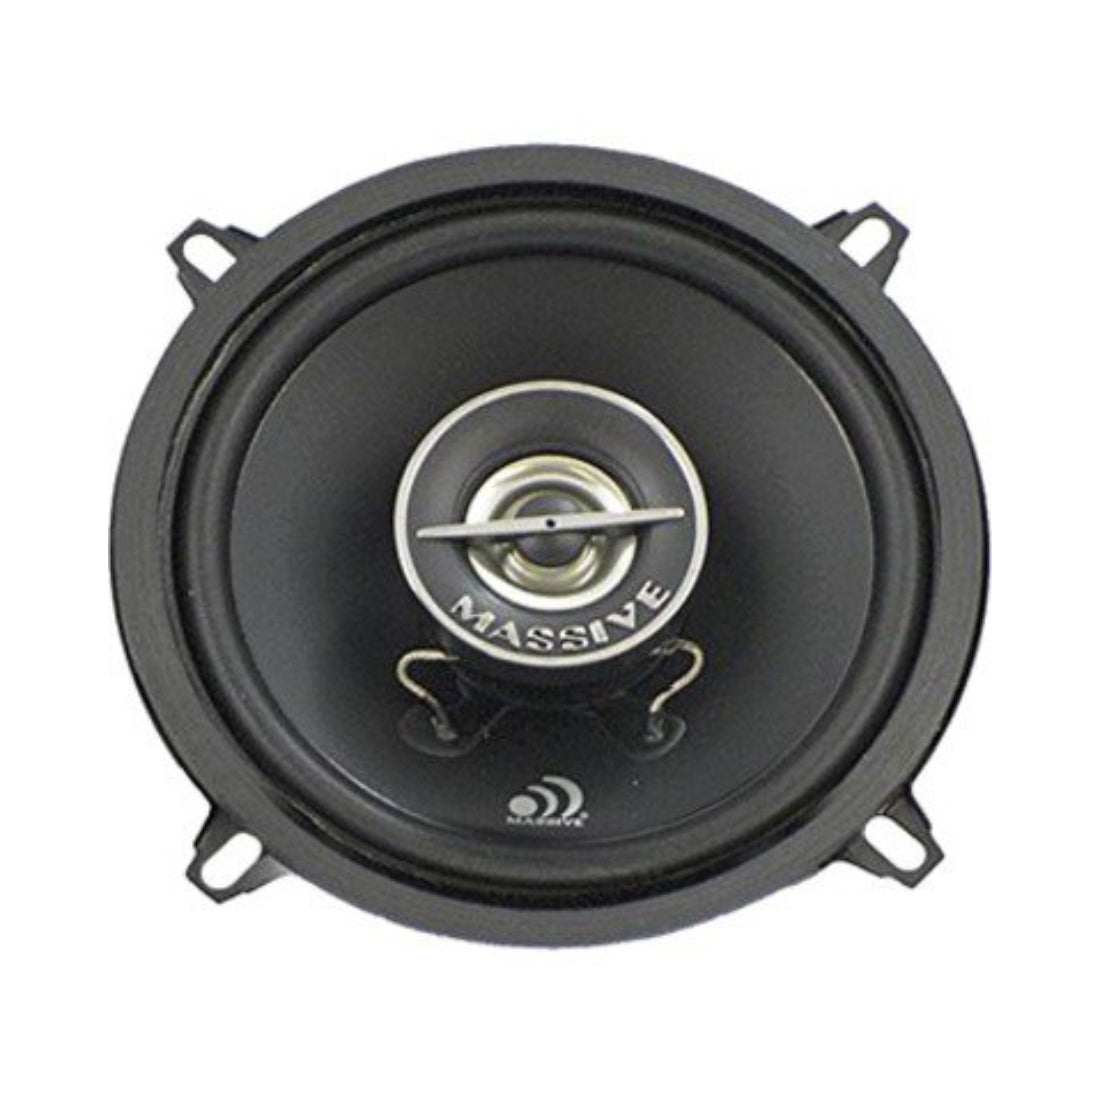 Massive Audio DX5 80W Max 5.25" 2-Way 4-Ohms Car Stereo Coaxial Speakers